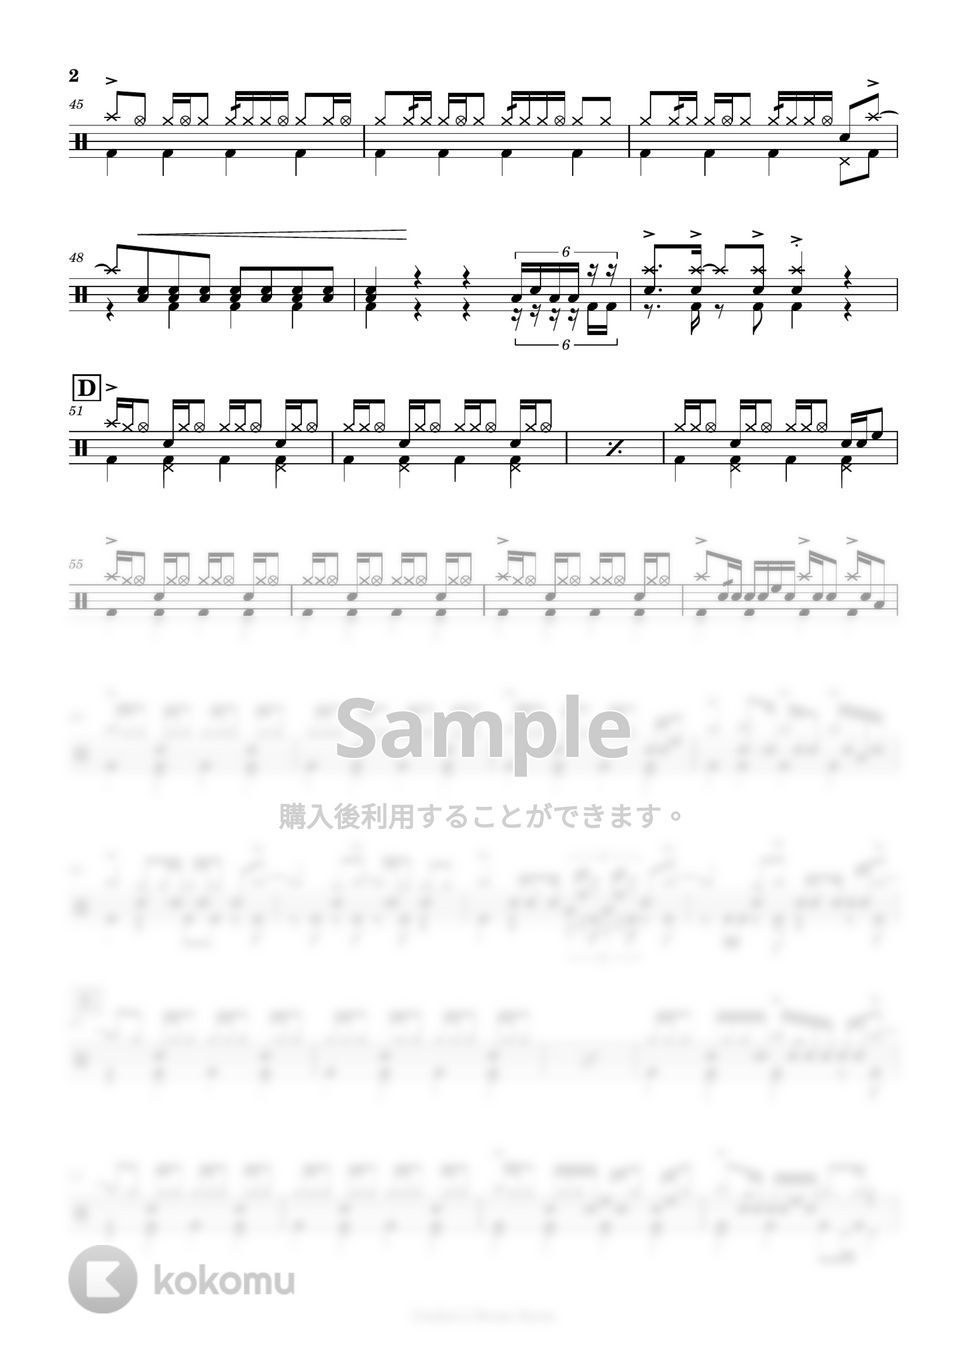 Ado - 心という名の不可解 by Cookie's Drum Score